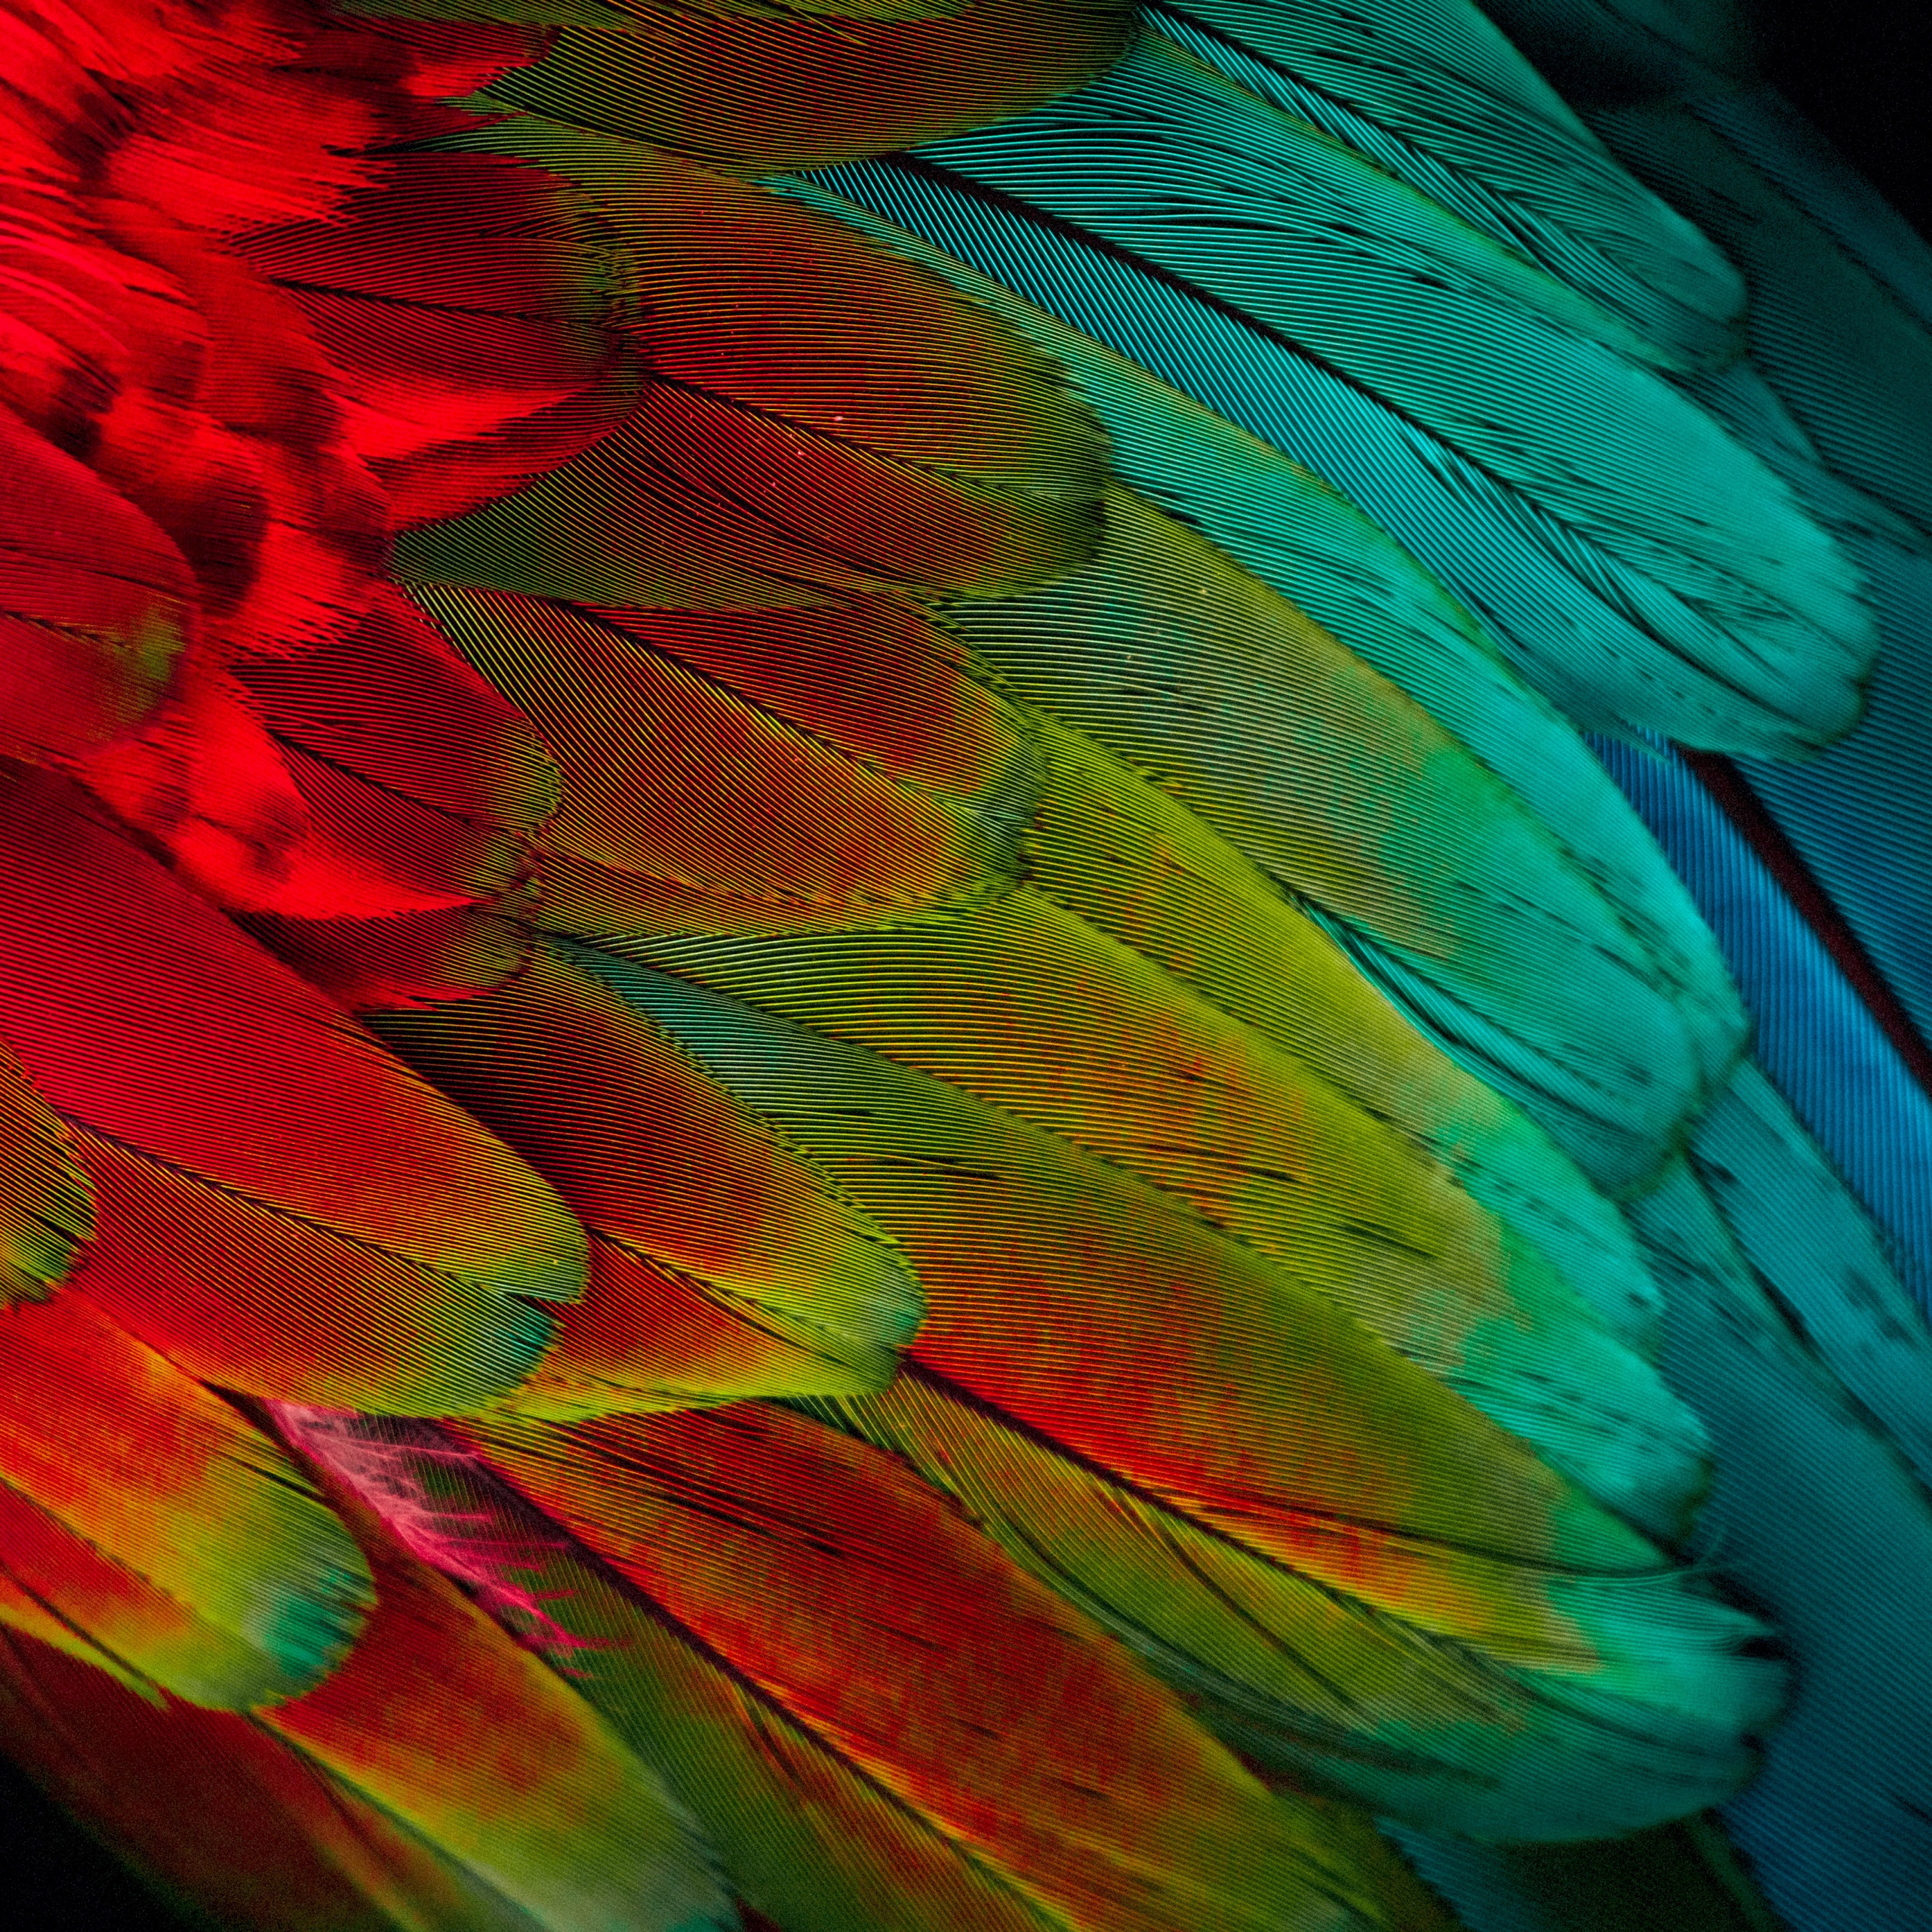 red parrot feathers